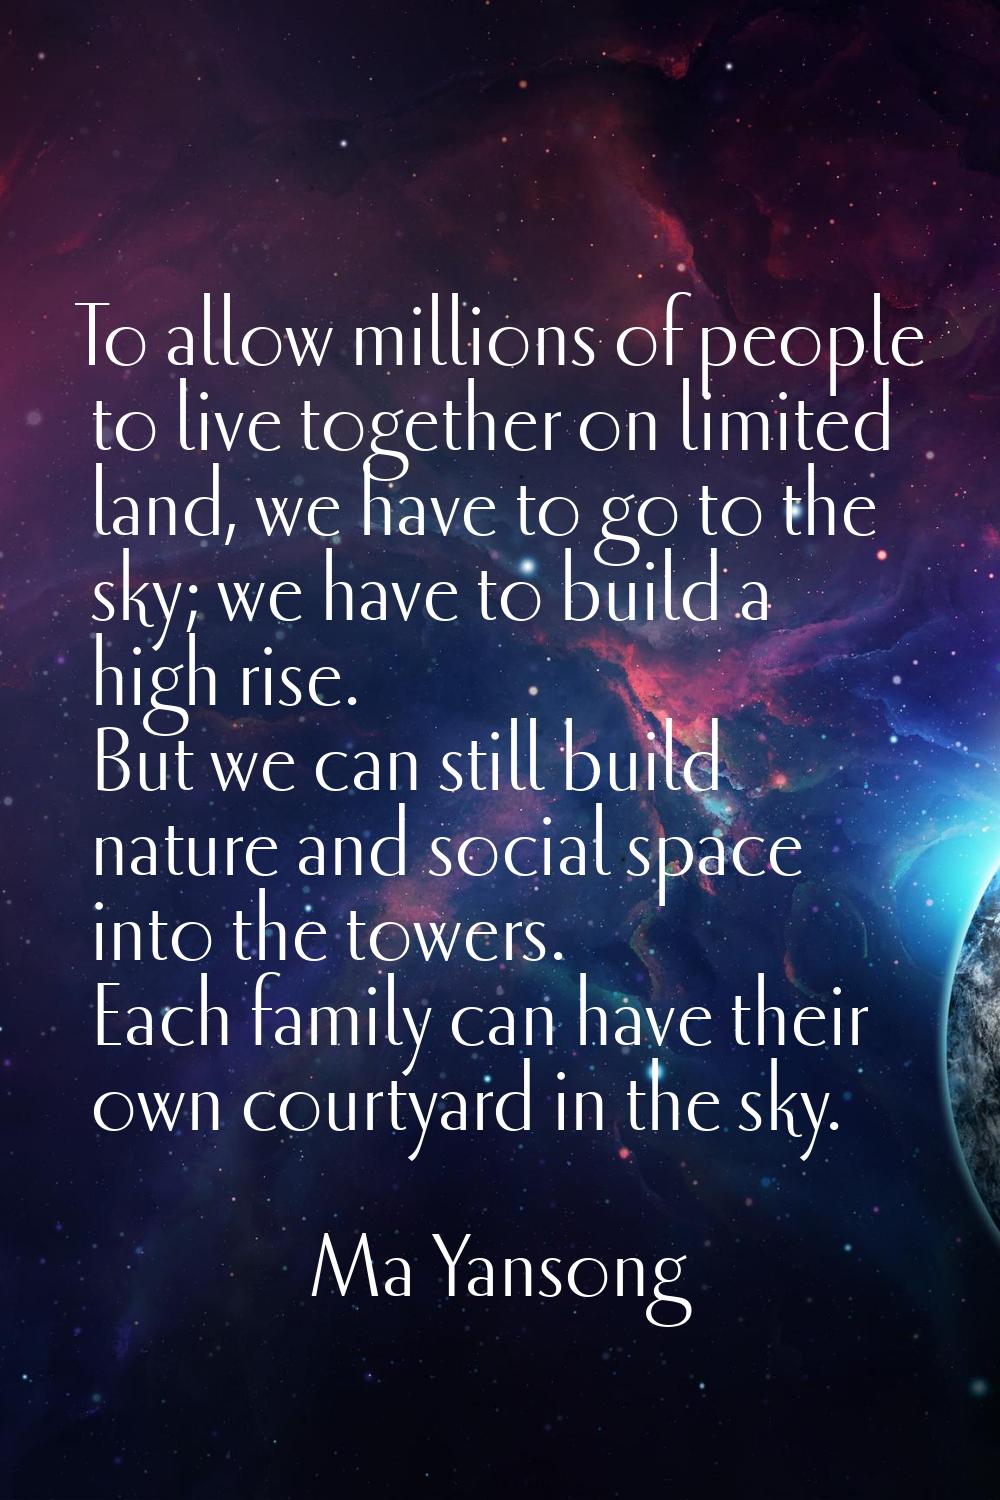 To allow millions of people to live together on limited land, we have to go to the sky; we have to 